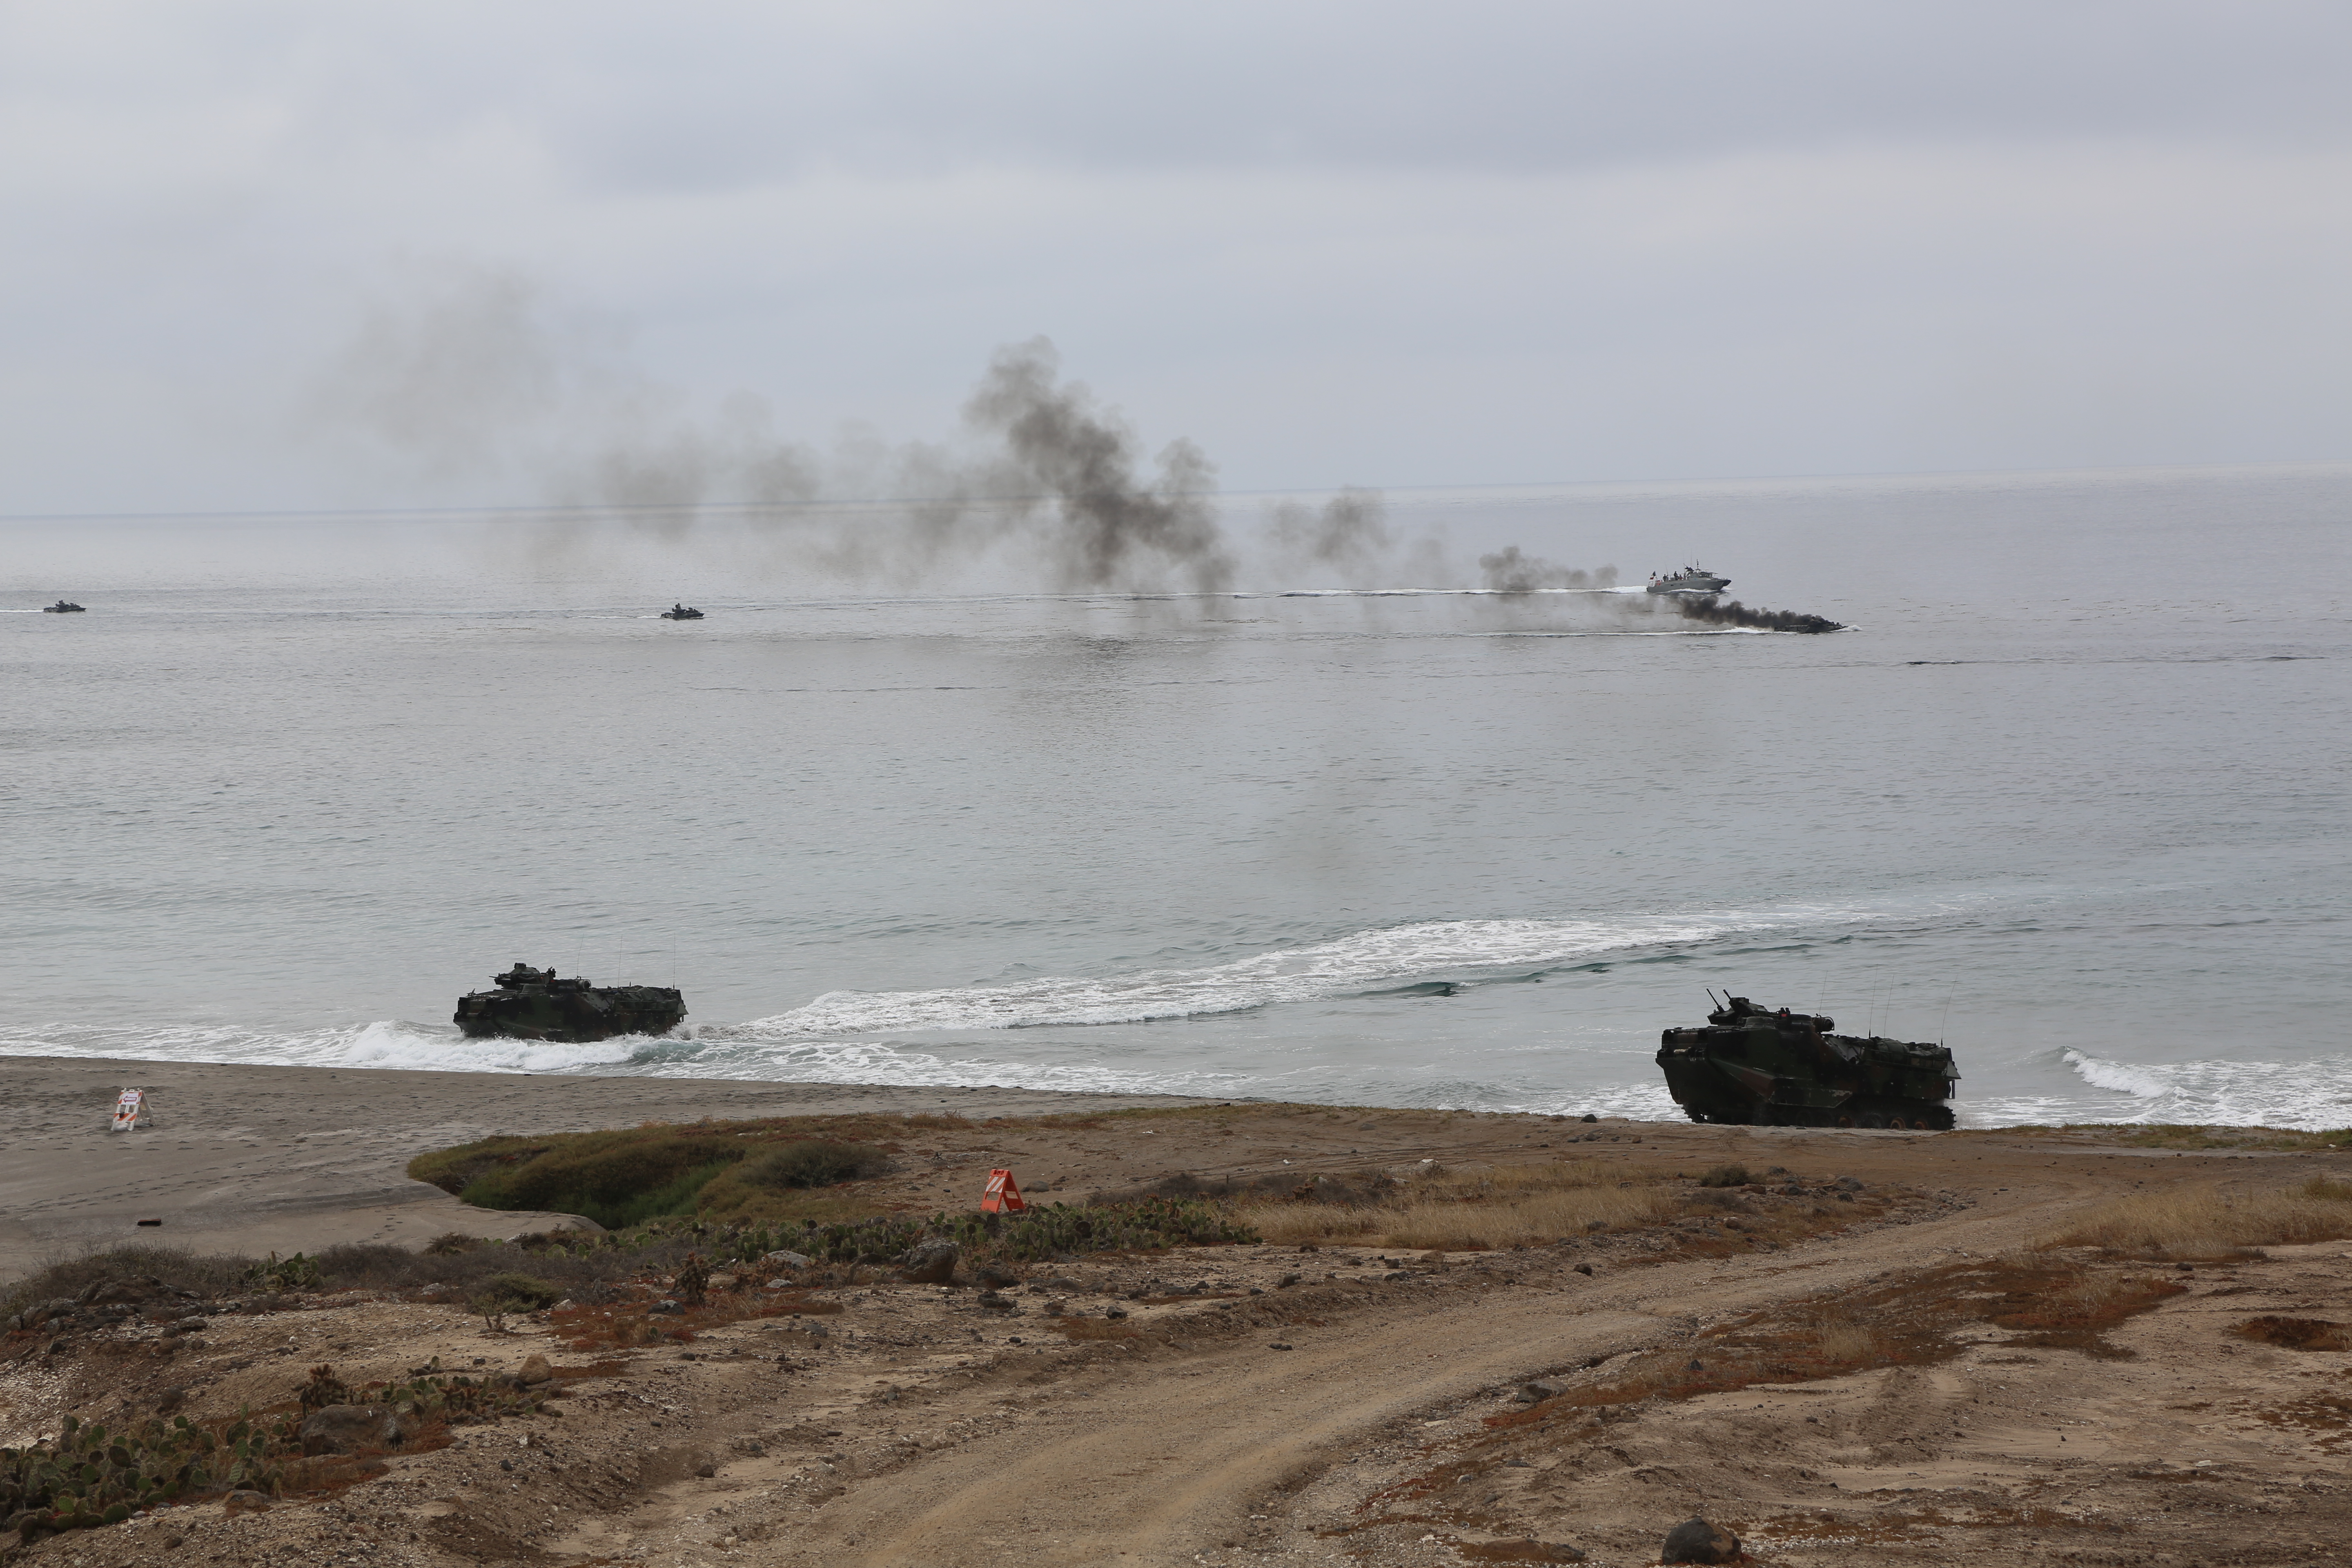 U.S. Marines with Bravo Company, 3rd Assault Amphibian Battalion and service members with the Mexican Navy take part in a mechanized assault exercise using assault amphibious vehicles to enhance their sea-to-land capabilities aboard San Clemente Island, California, July 30, 2016 during the Southern California portion of Rim of the Pacific 2016. US Marine Corps photo.